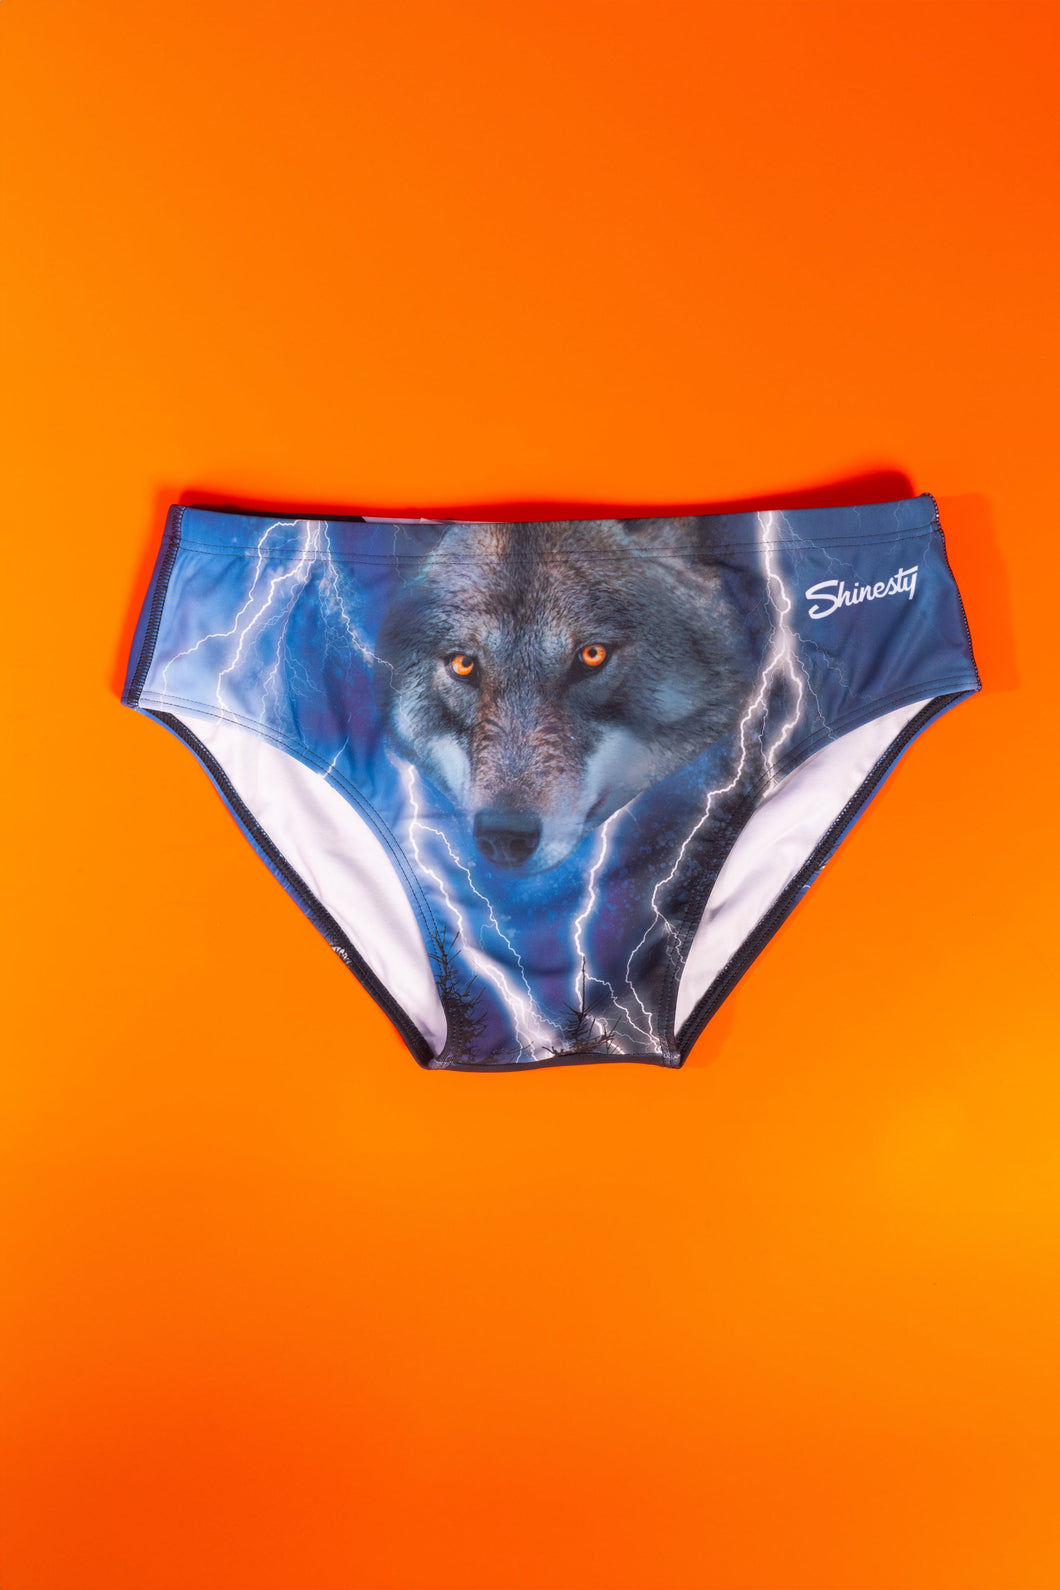 A wolf face swim brief inspired by middle school tees.